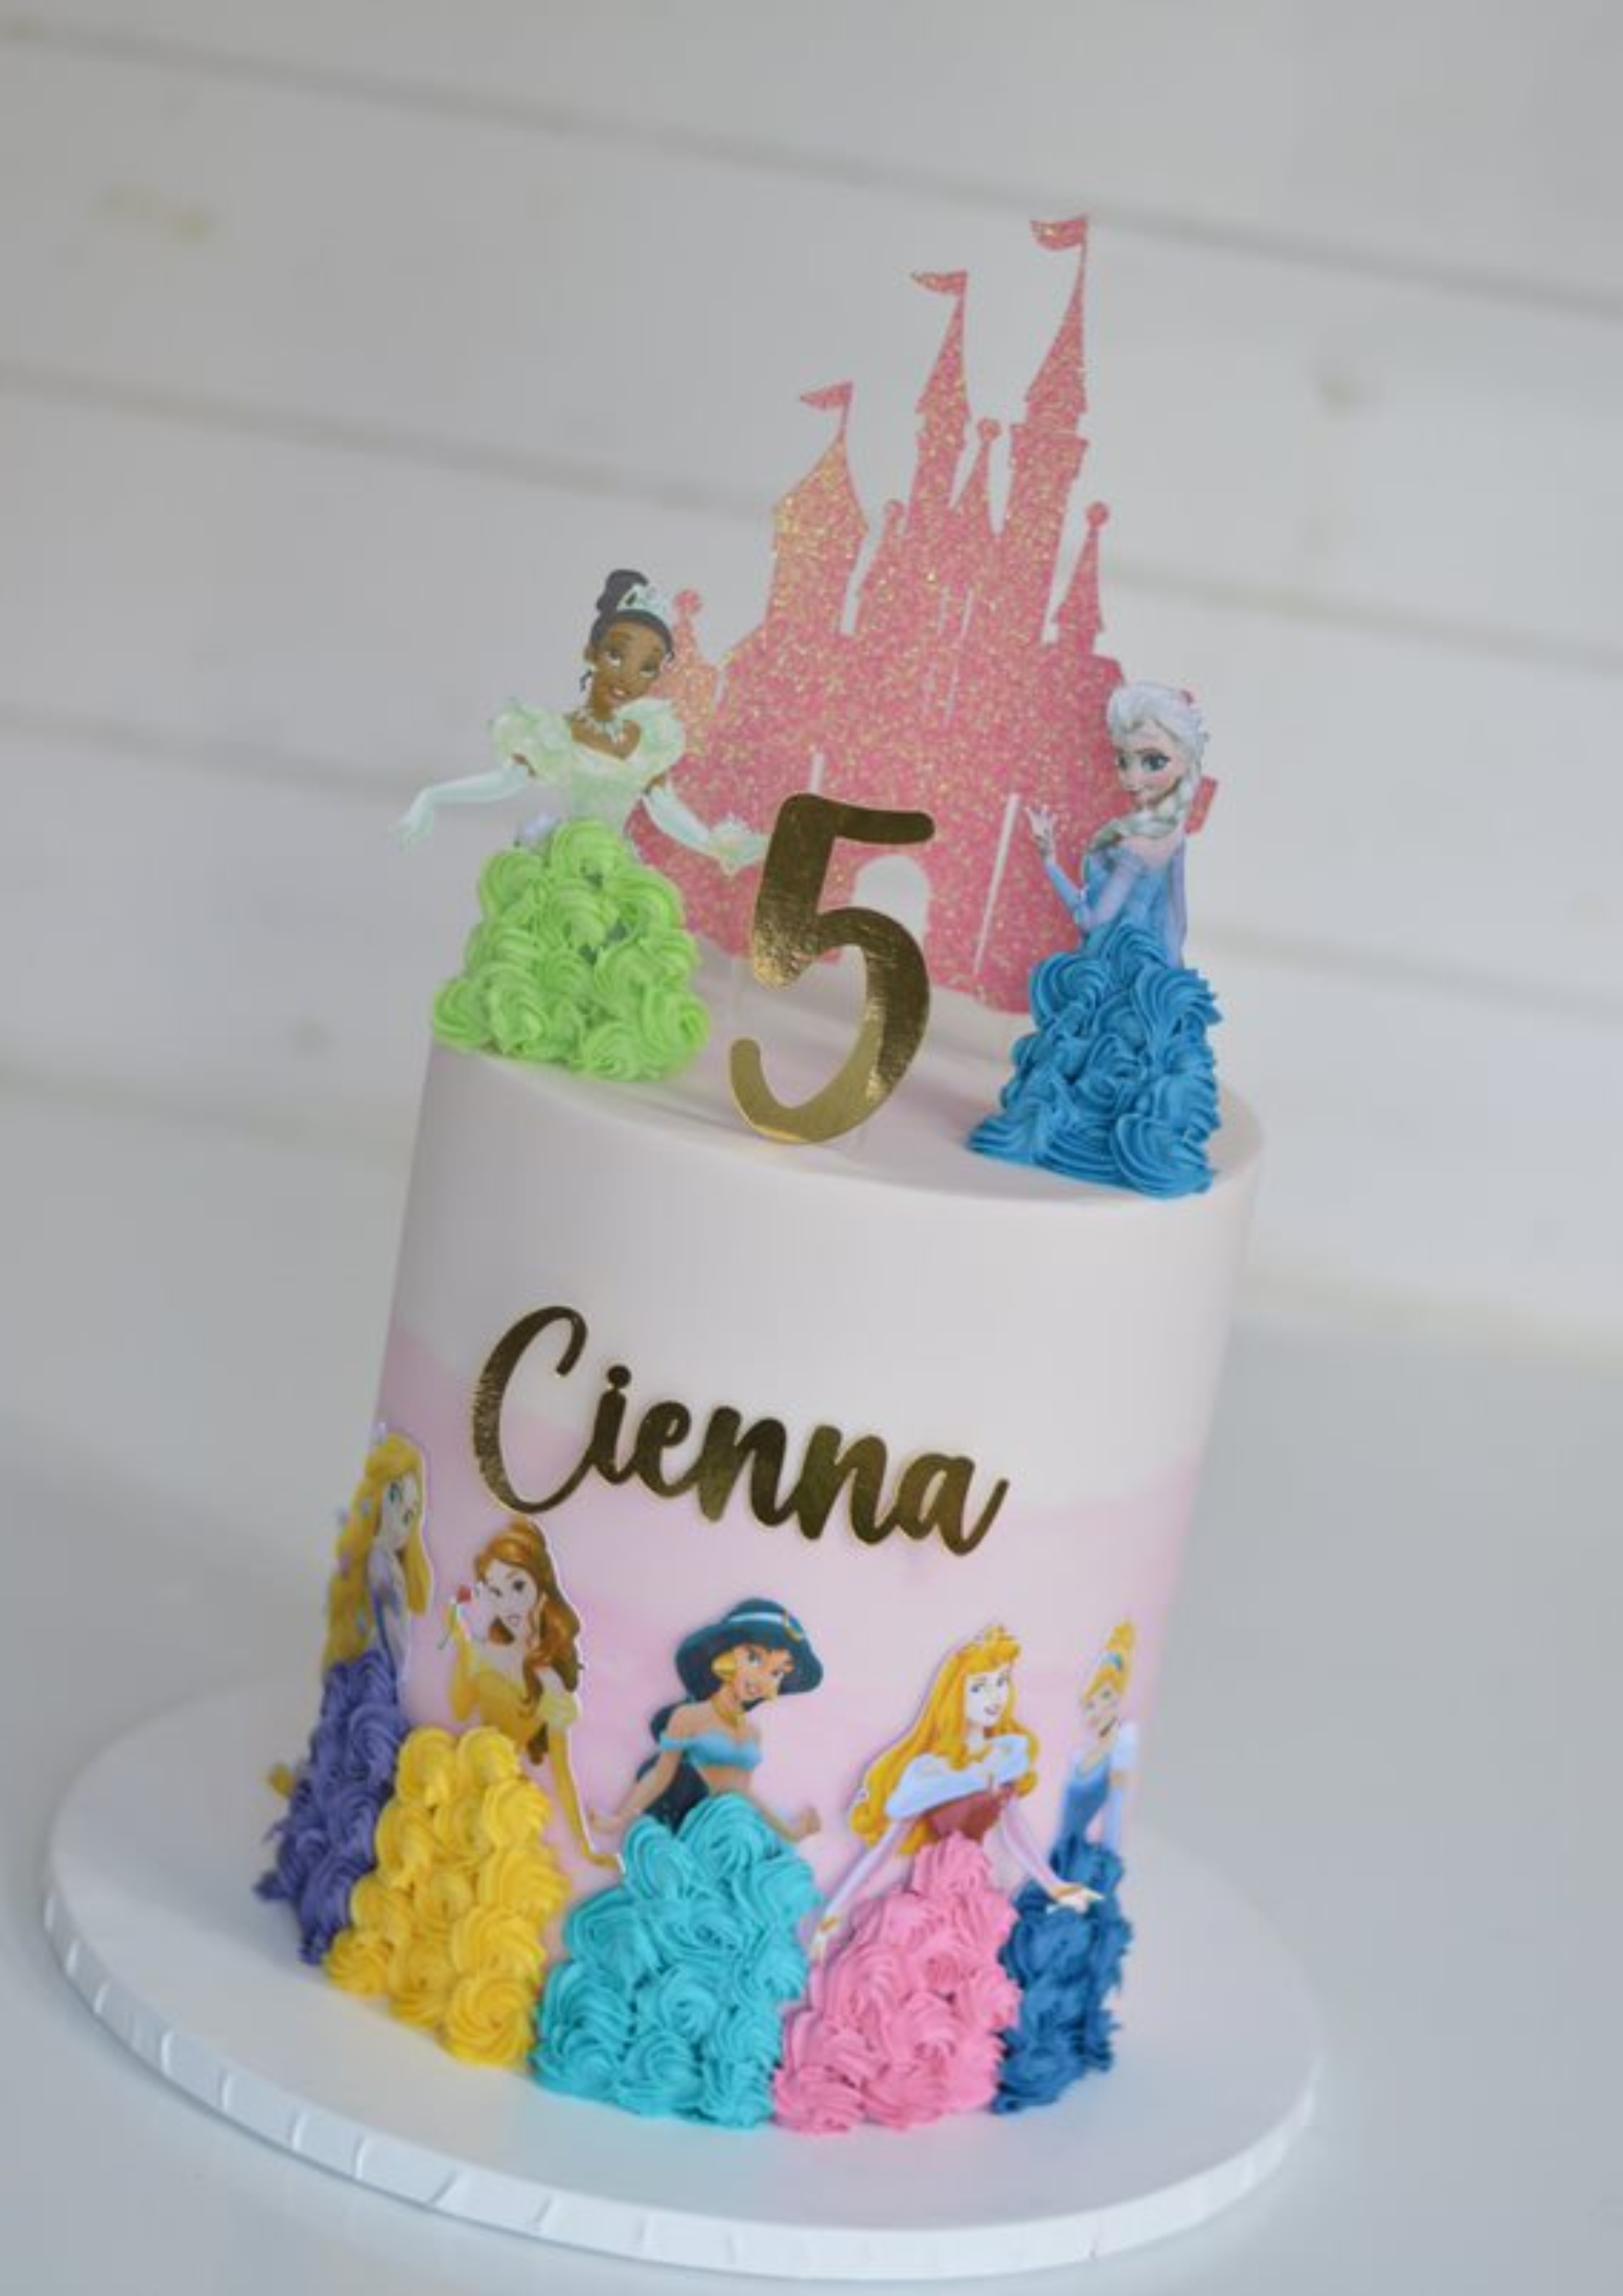 Mum creates incredible 'five minute princess cake' for her little girl's  third birthday | Daily Mail Online